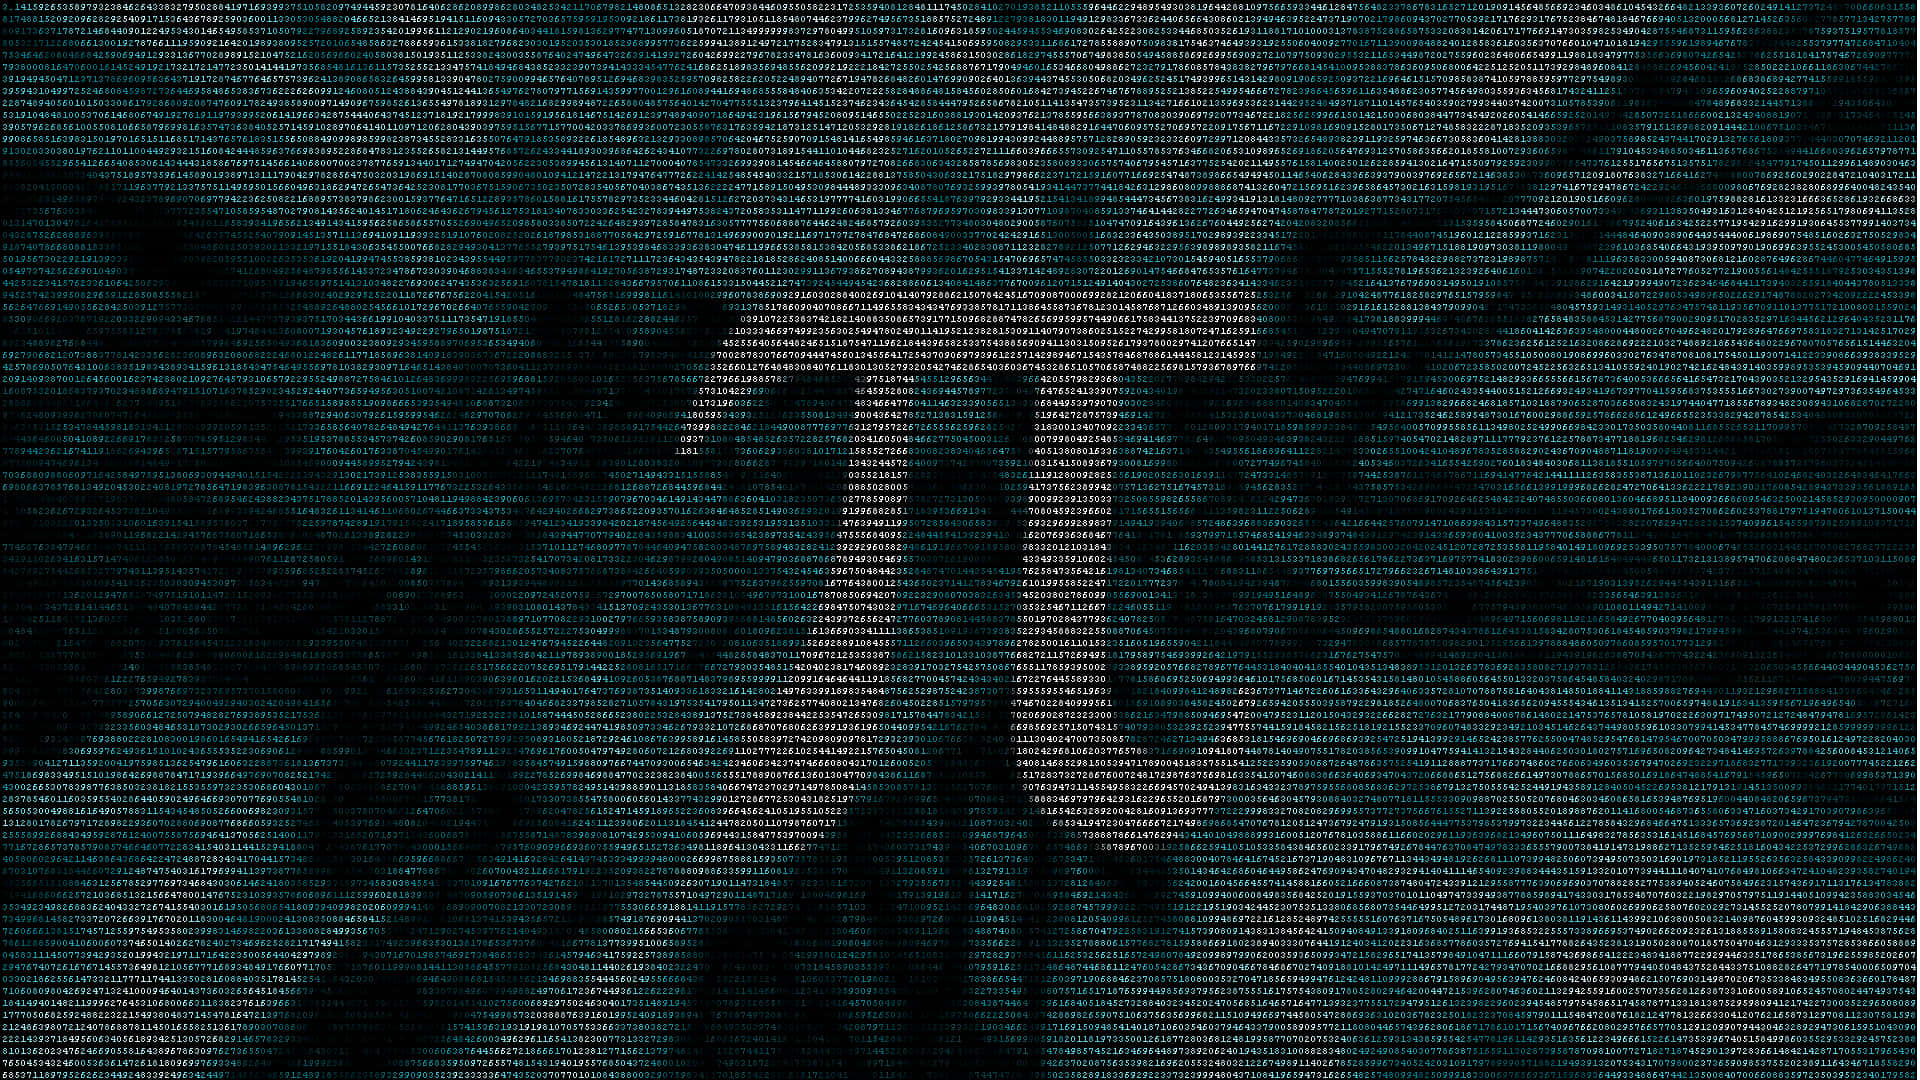 Pi - A Black And White Image Of The Pi Symbol Background